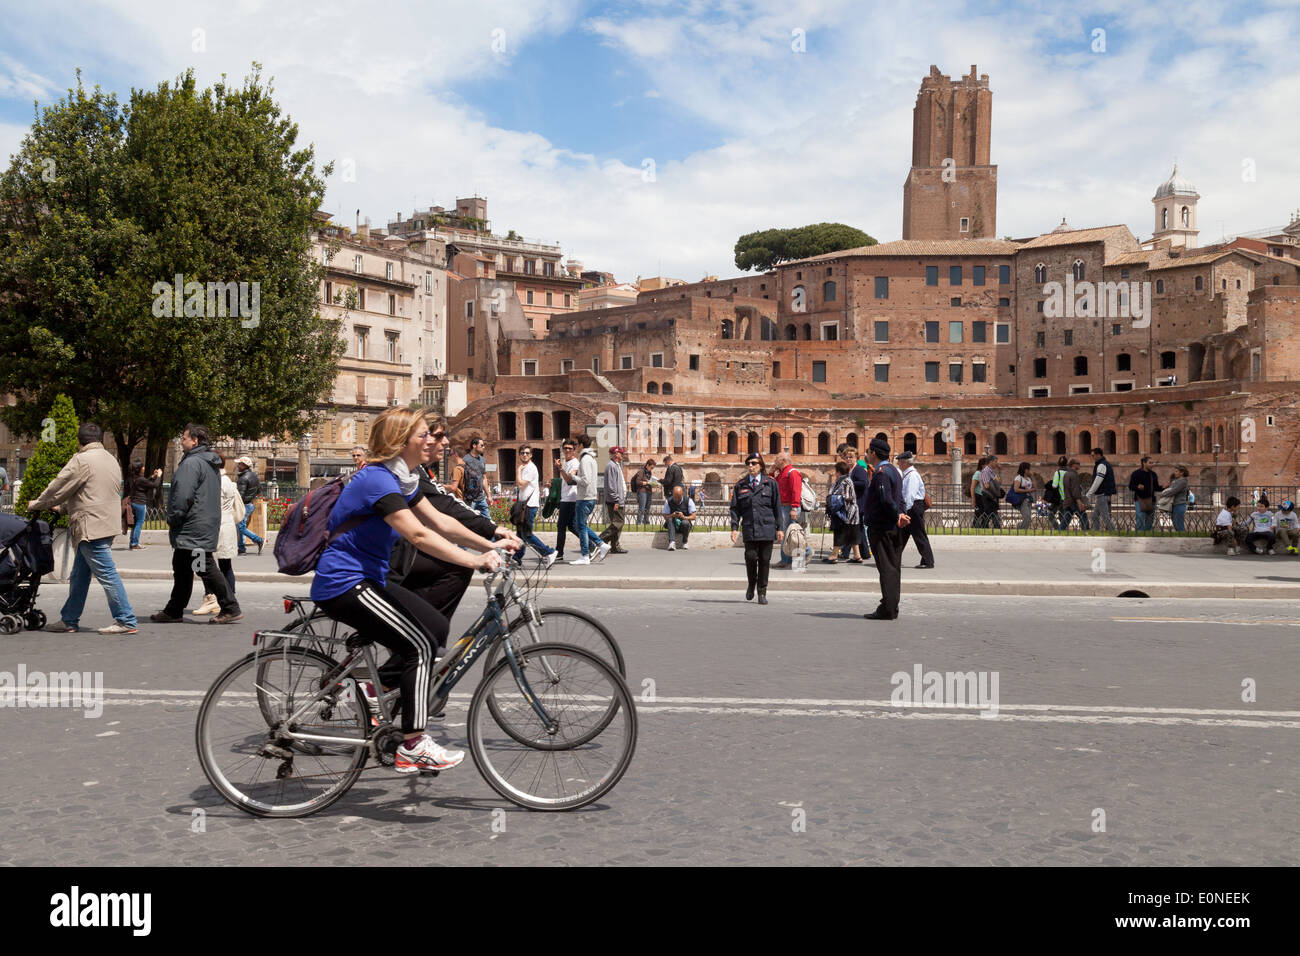 Cycling Italy; people cycling, riding bicycles, Rome city centre, Rome, Italy Europe Stock Photo